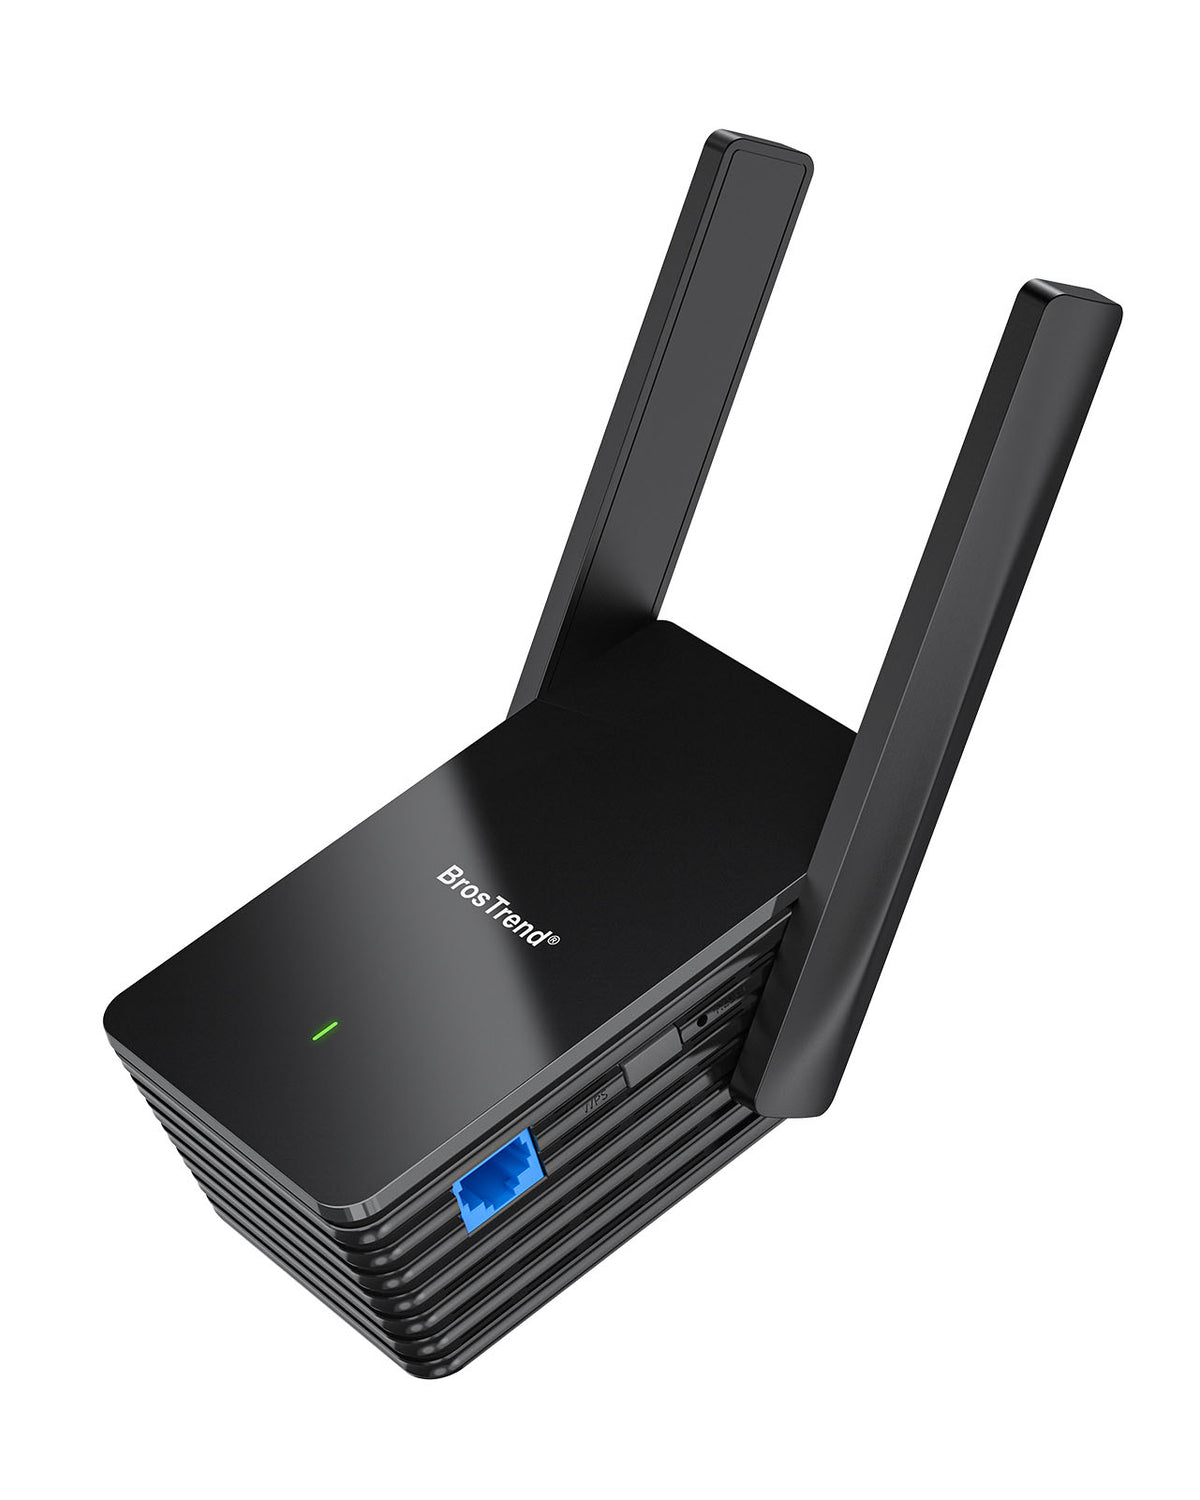 BrosTrend-AX1500-WiFi-to-Ethernet-Adapter-Supports-WiFi-6-Dual-Band-Connection-Comes-with-Gigabit-1000-Mbps-RJ45-LAN-Port.jpg__PID:1425a1c8-b4b4-4f16-85b9-562d60bfbae7